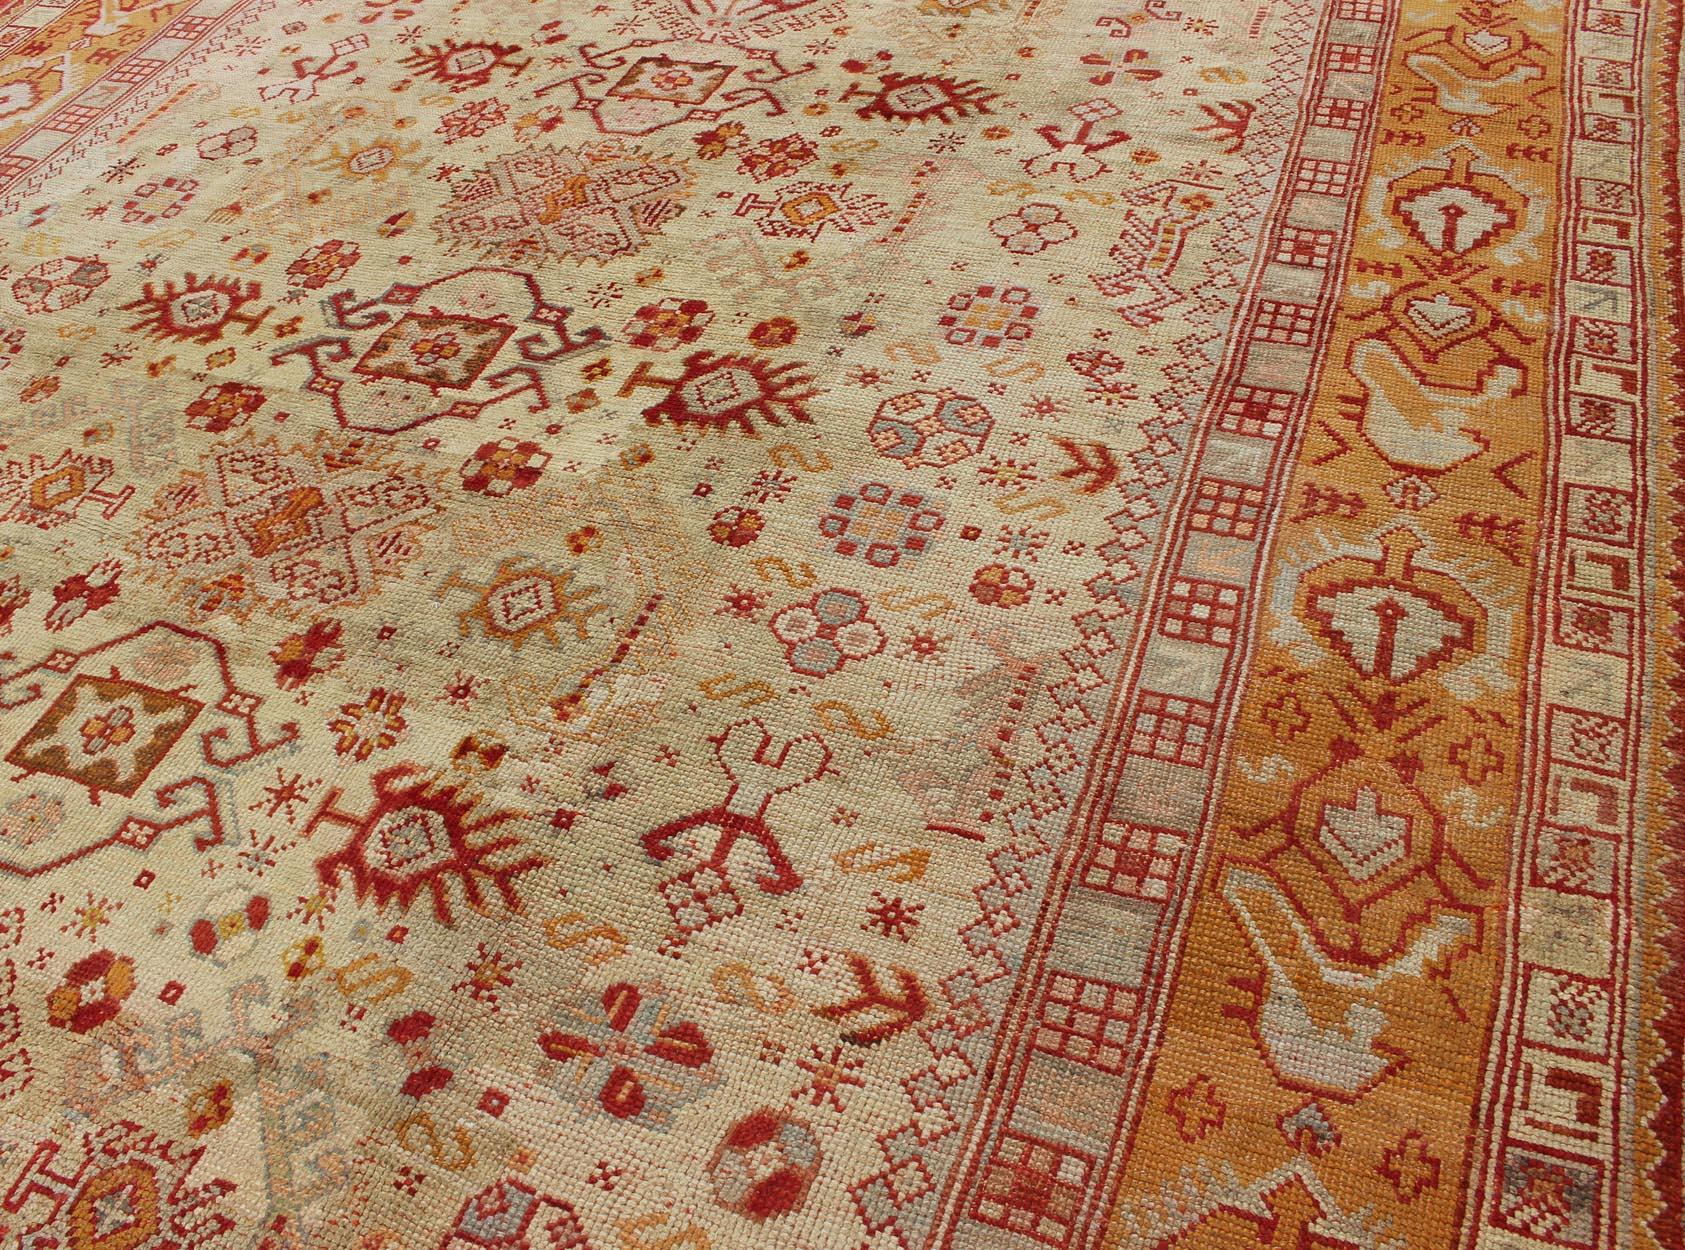 Antique Turkish Oushak Carpet With All-Over Design In Red, Taupe, and Orange For Sale 2